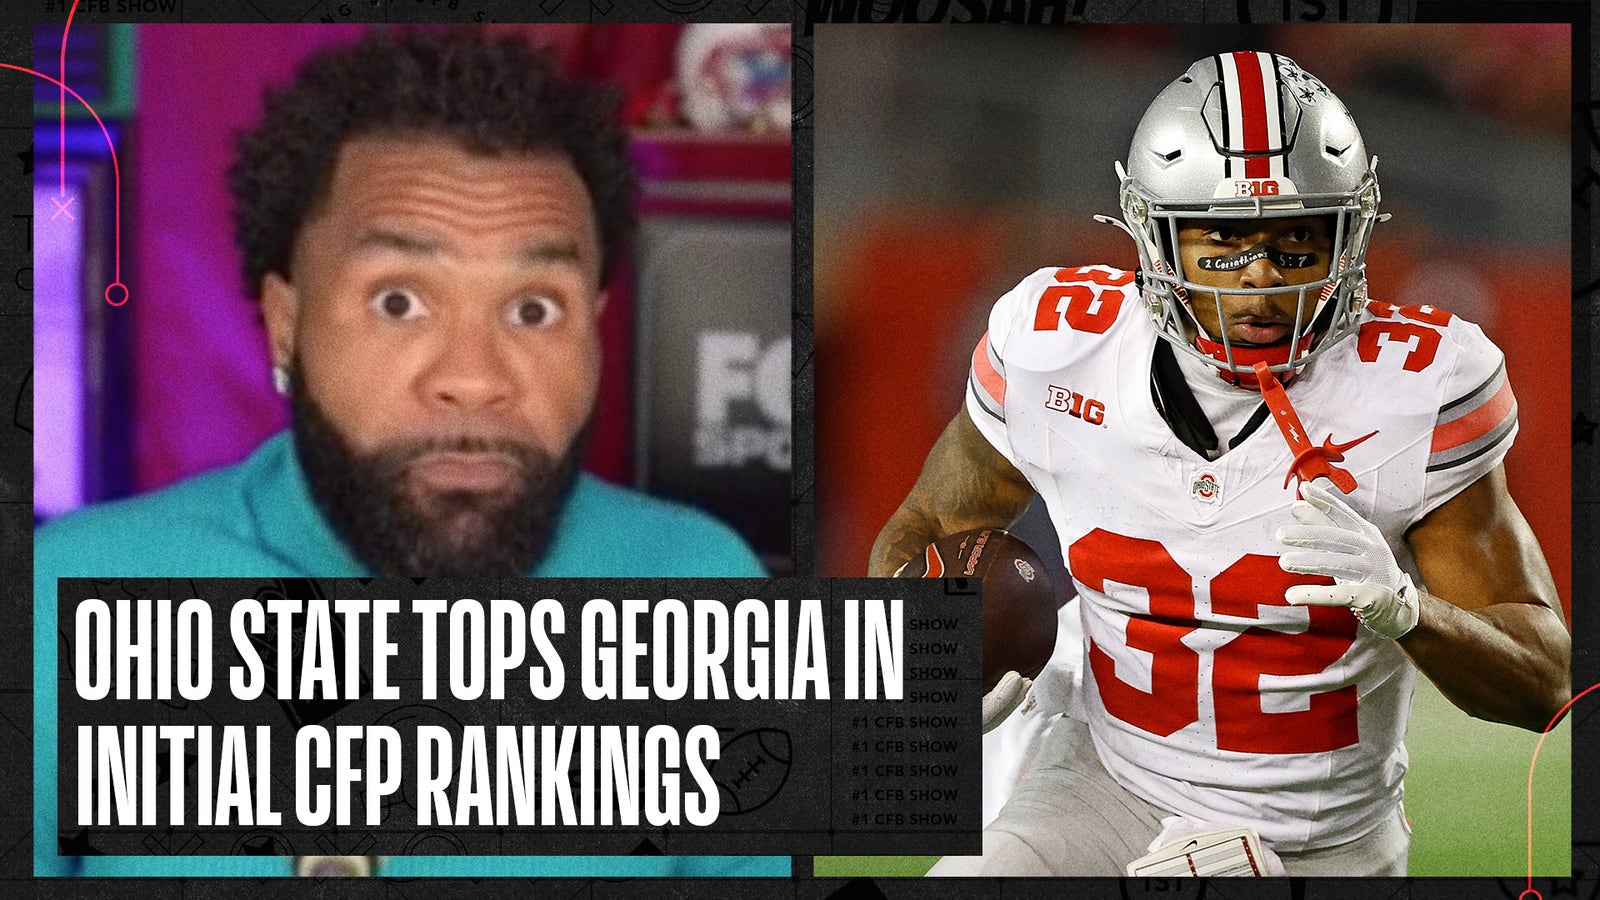 Ohio State is ABOVE Georgia in the initial CFP rankings